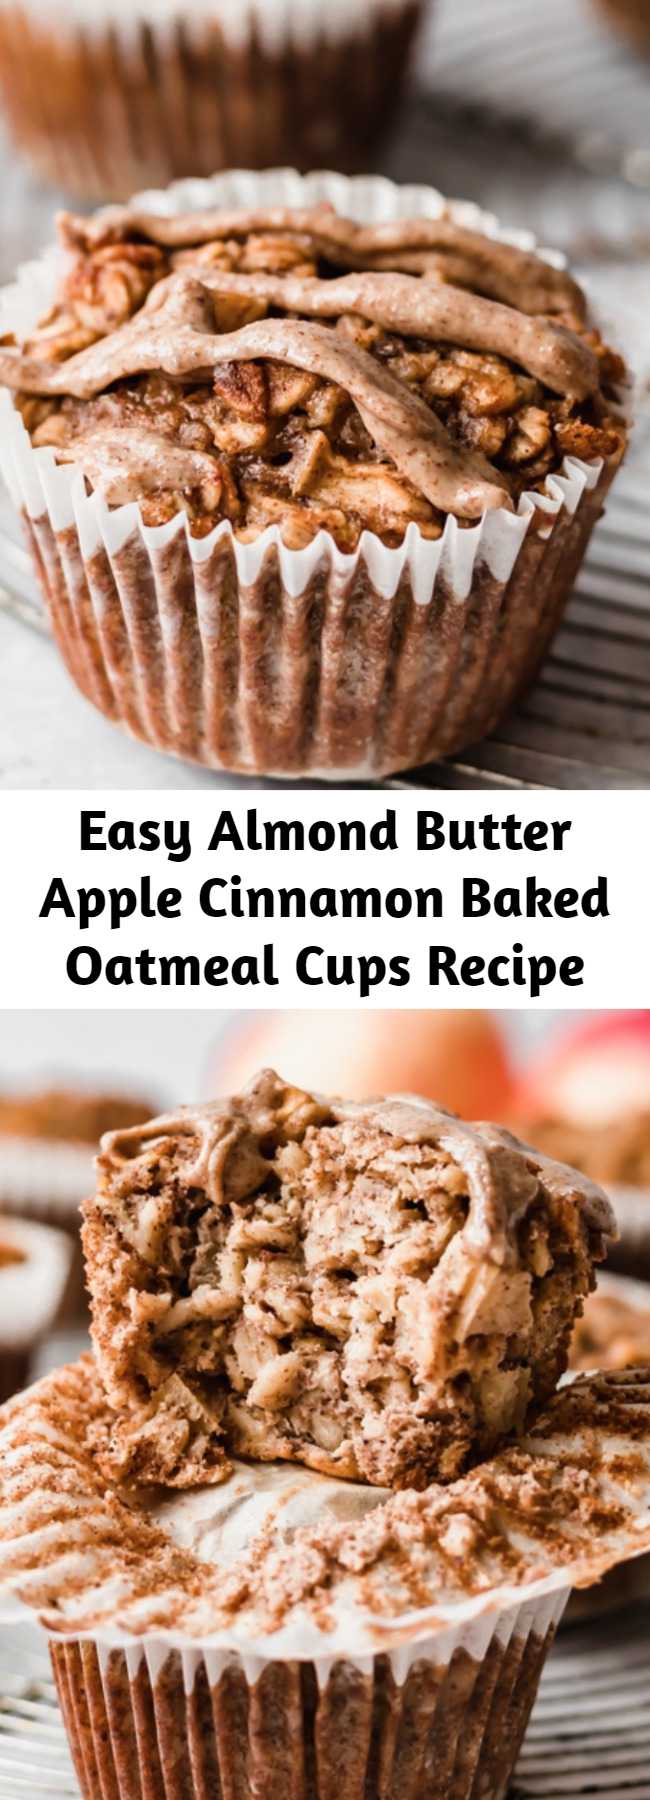 Easy Almond Butter Apple Cinnamon Baked Oatmeal Cups Recipe - Easy apple cinnamon baked oatmeal cups made with applesauce, fresh apples, oats, maple syrup and almond butter for a boost of protein + flavor. Freezer-friendly, great for kids or meal prep! #mealprep #freezerfriendly #oatmeal #oatmealcups #almondbutter #applerecipe #apples #kidfriendly #glutenfree